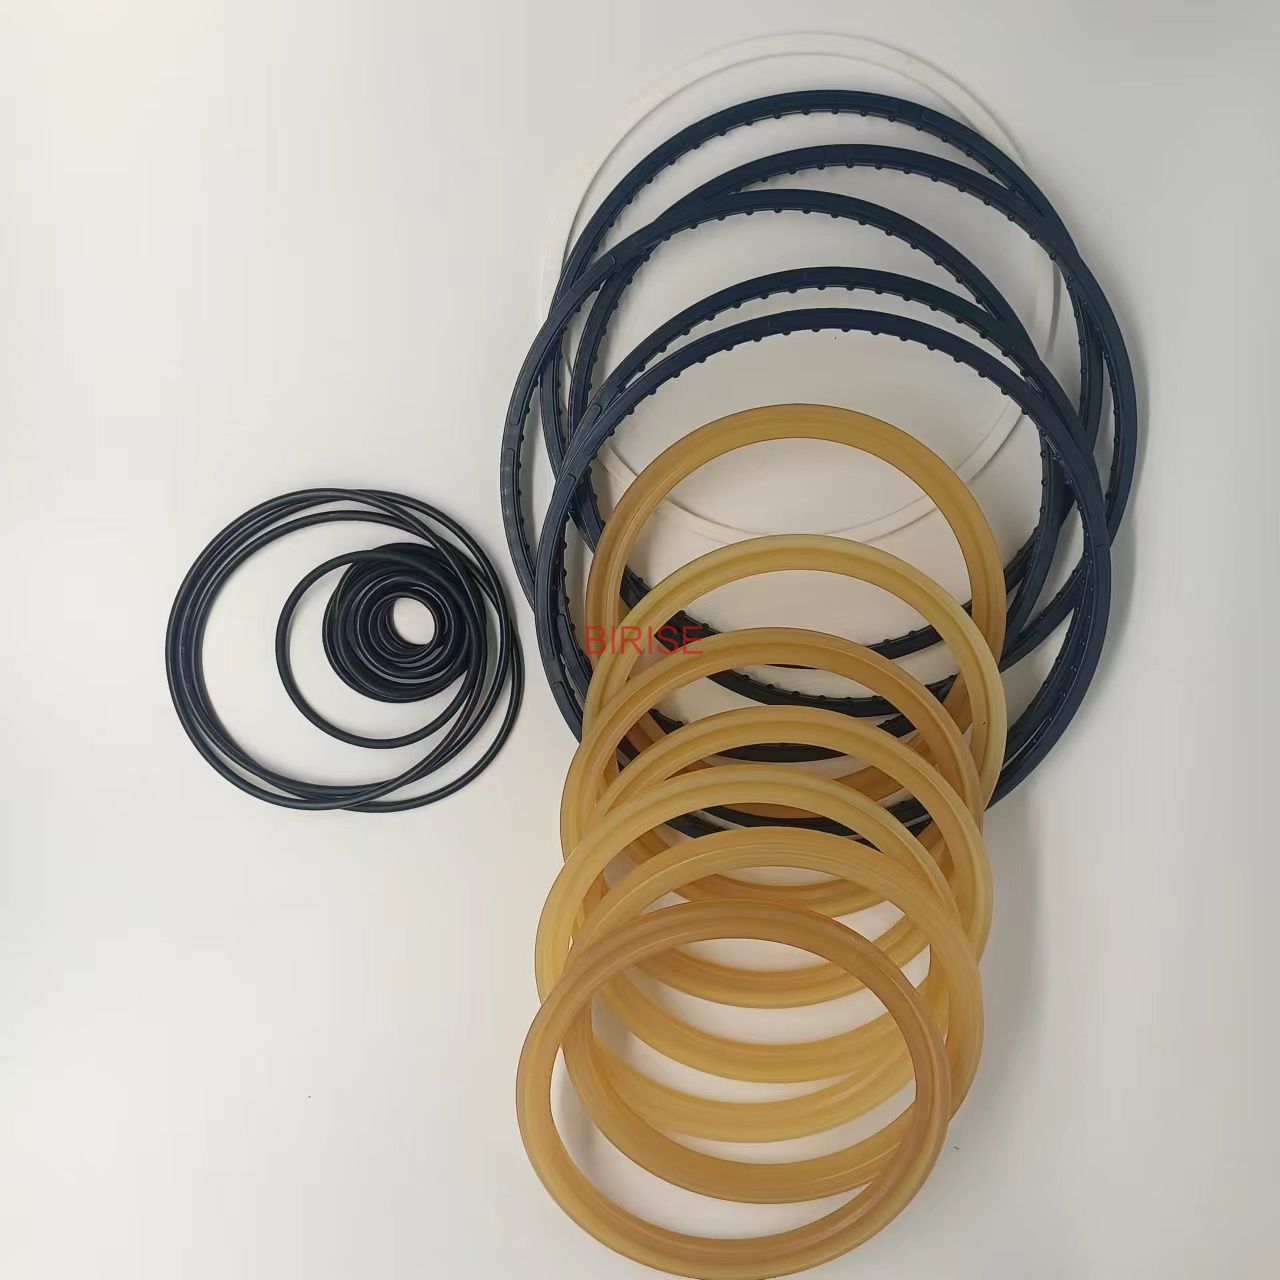 Hydraulic Breaker Seal Kits - High-Quality Replacement Kits for Hydraulic Components